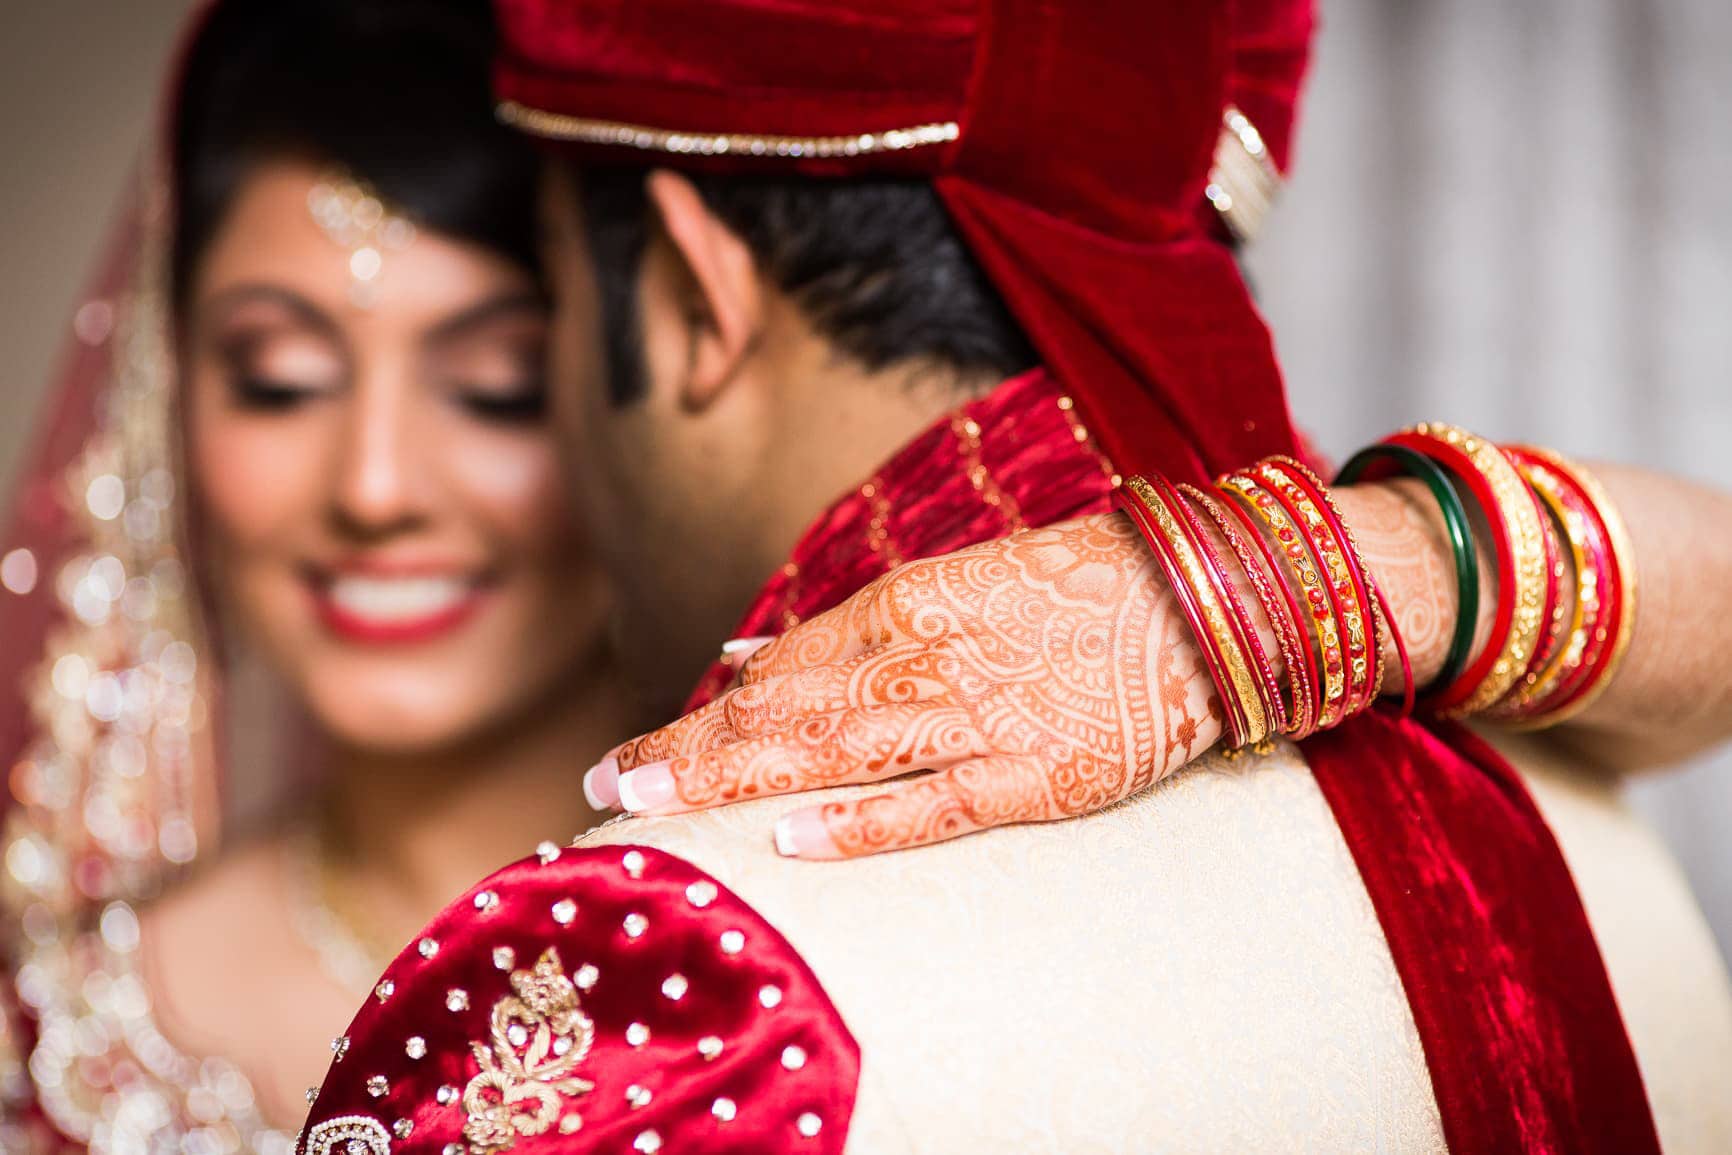 Indian bride smiles while putting her arm around her husband.